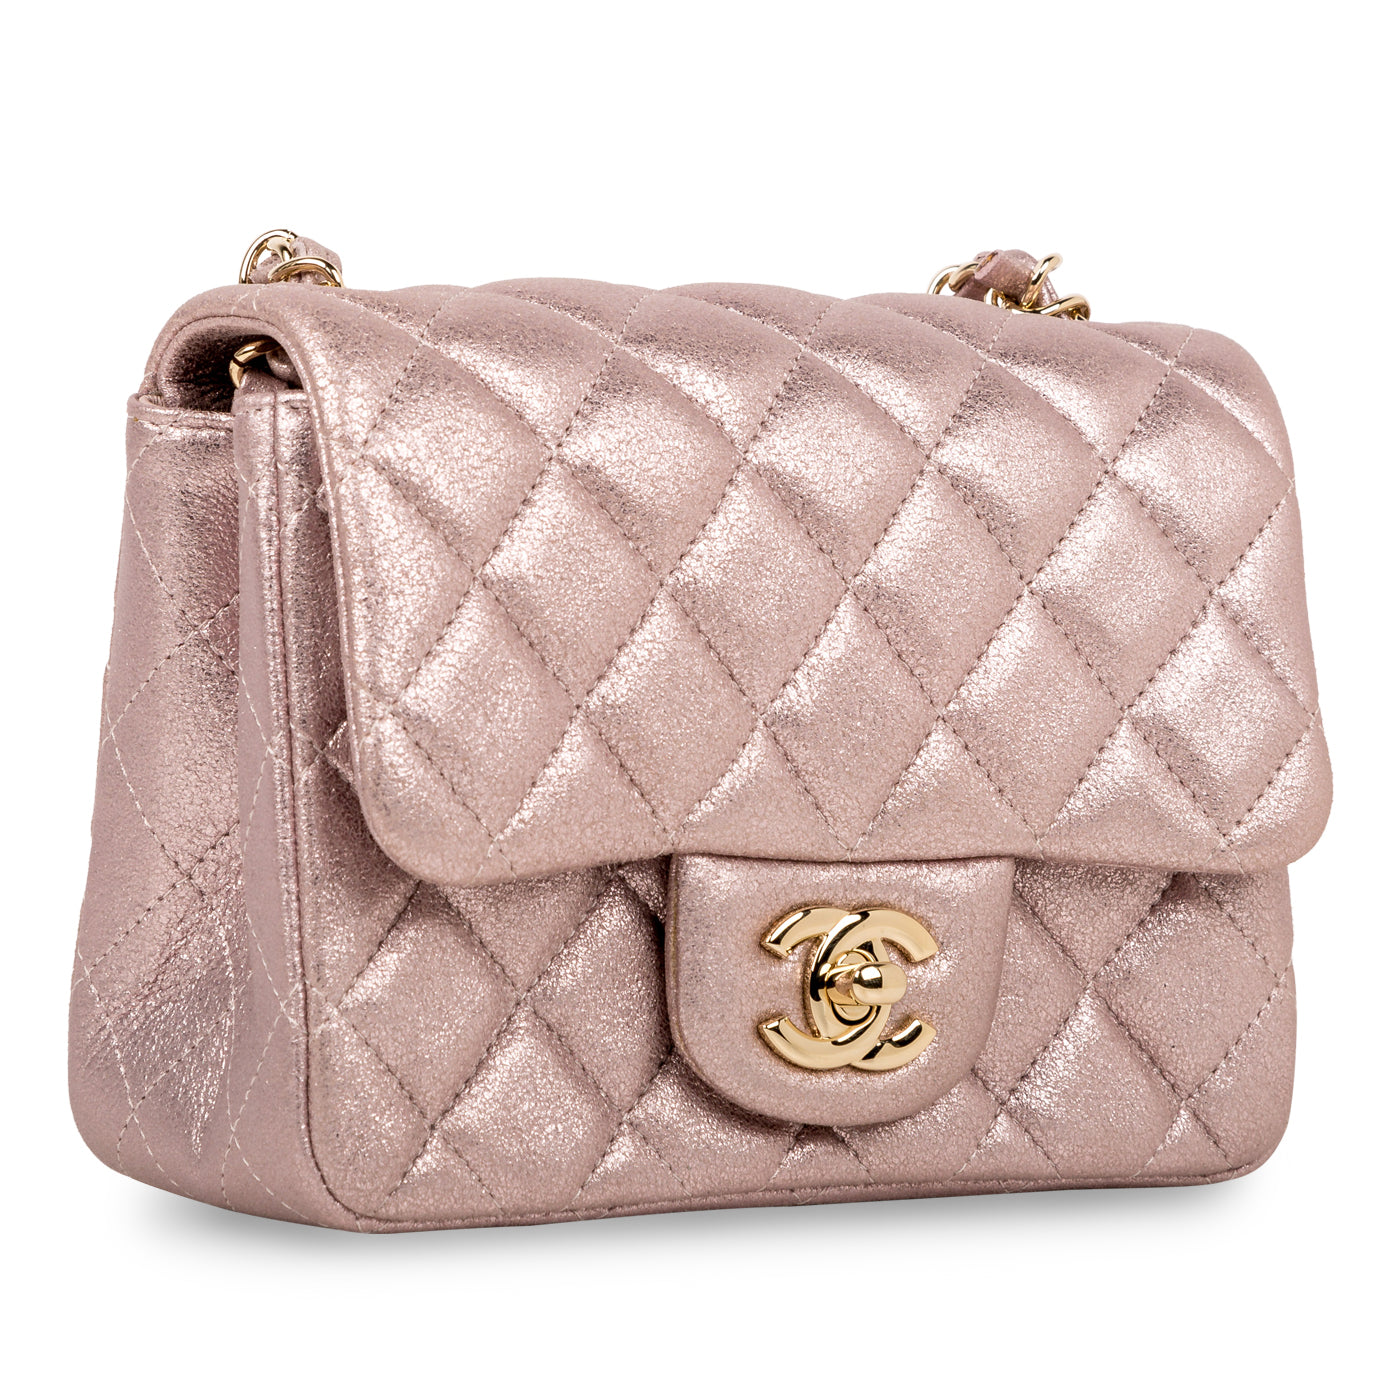 CHANEL Goatskin Quilted Medium Chanel 19 Flap Light Pink 1141416